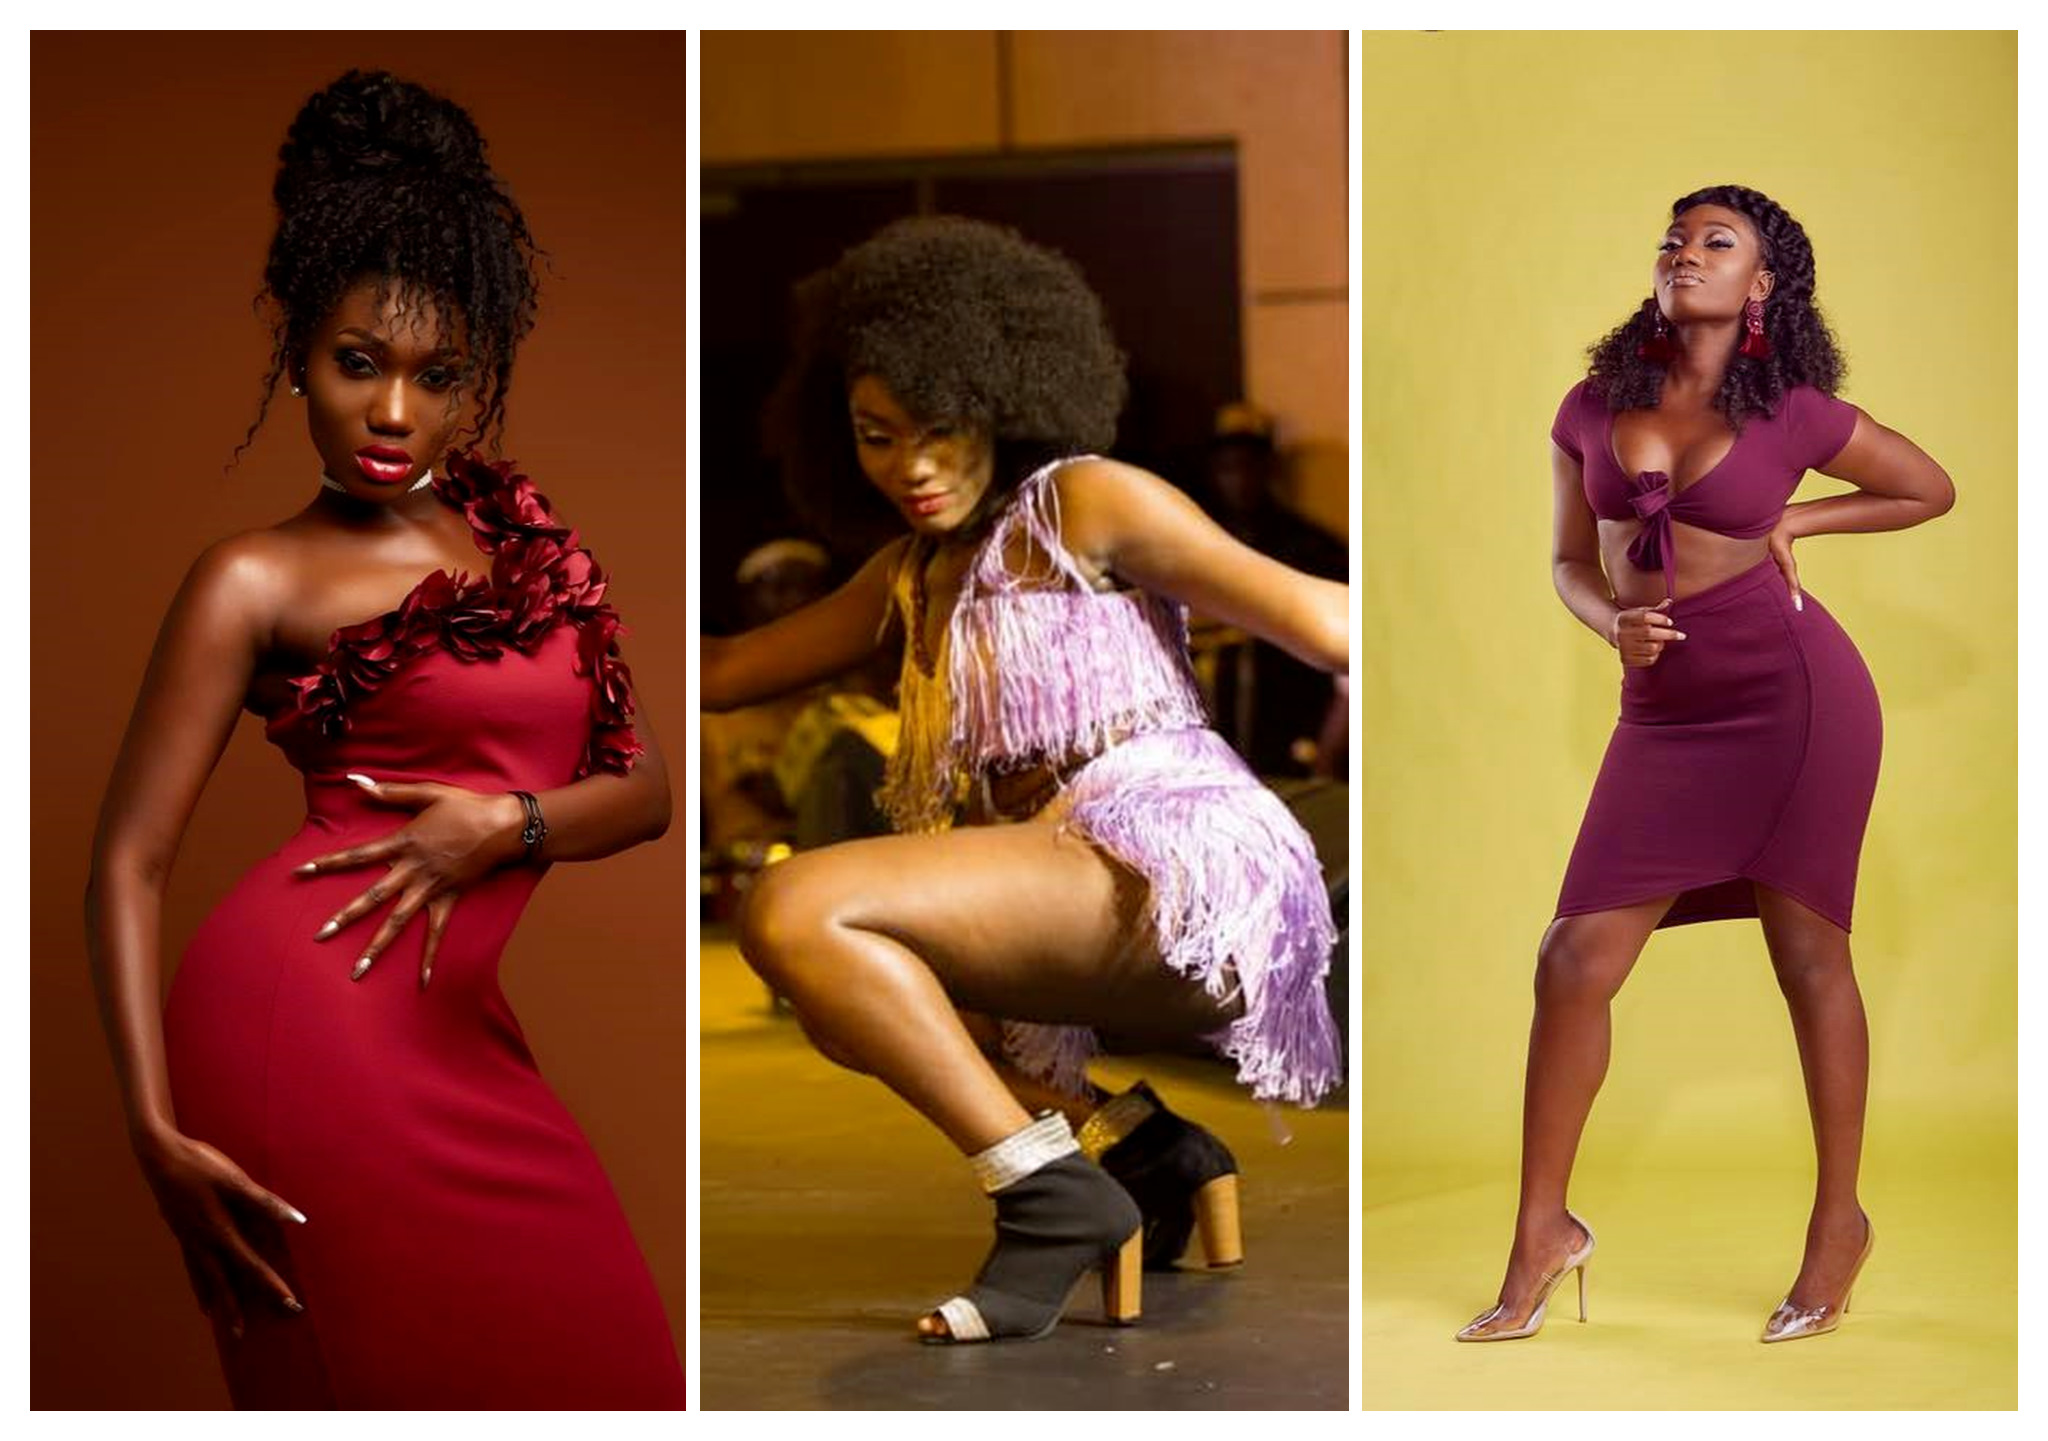 Wendy Shay Causes Confusion On Social Media With Her New Hips